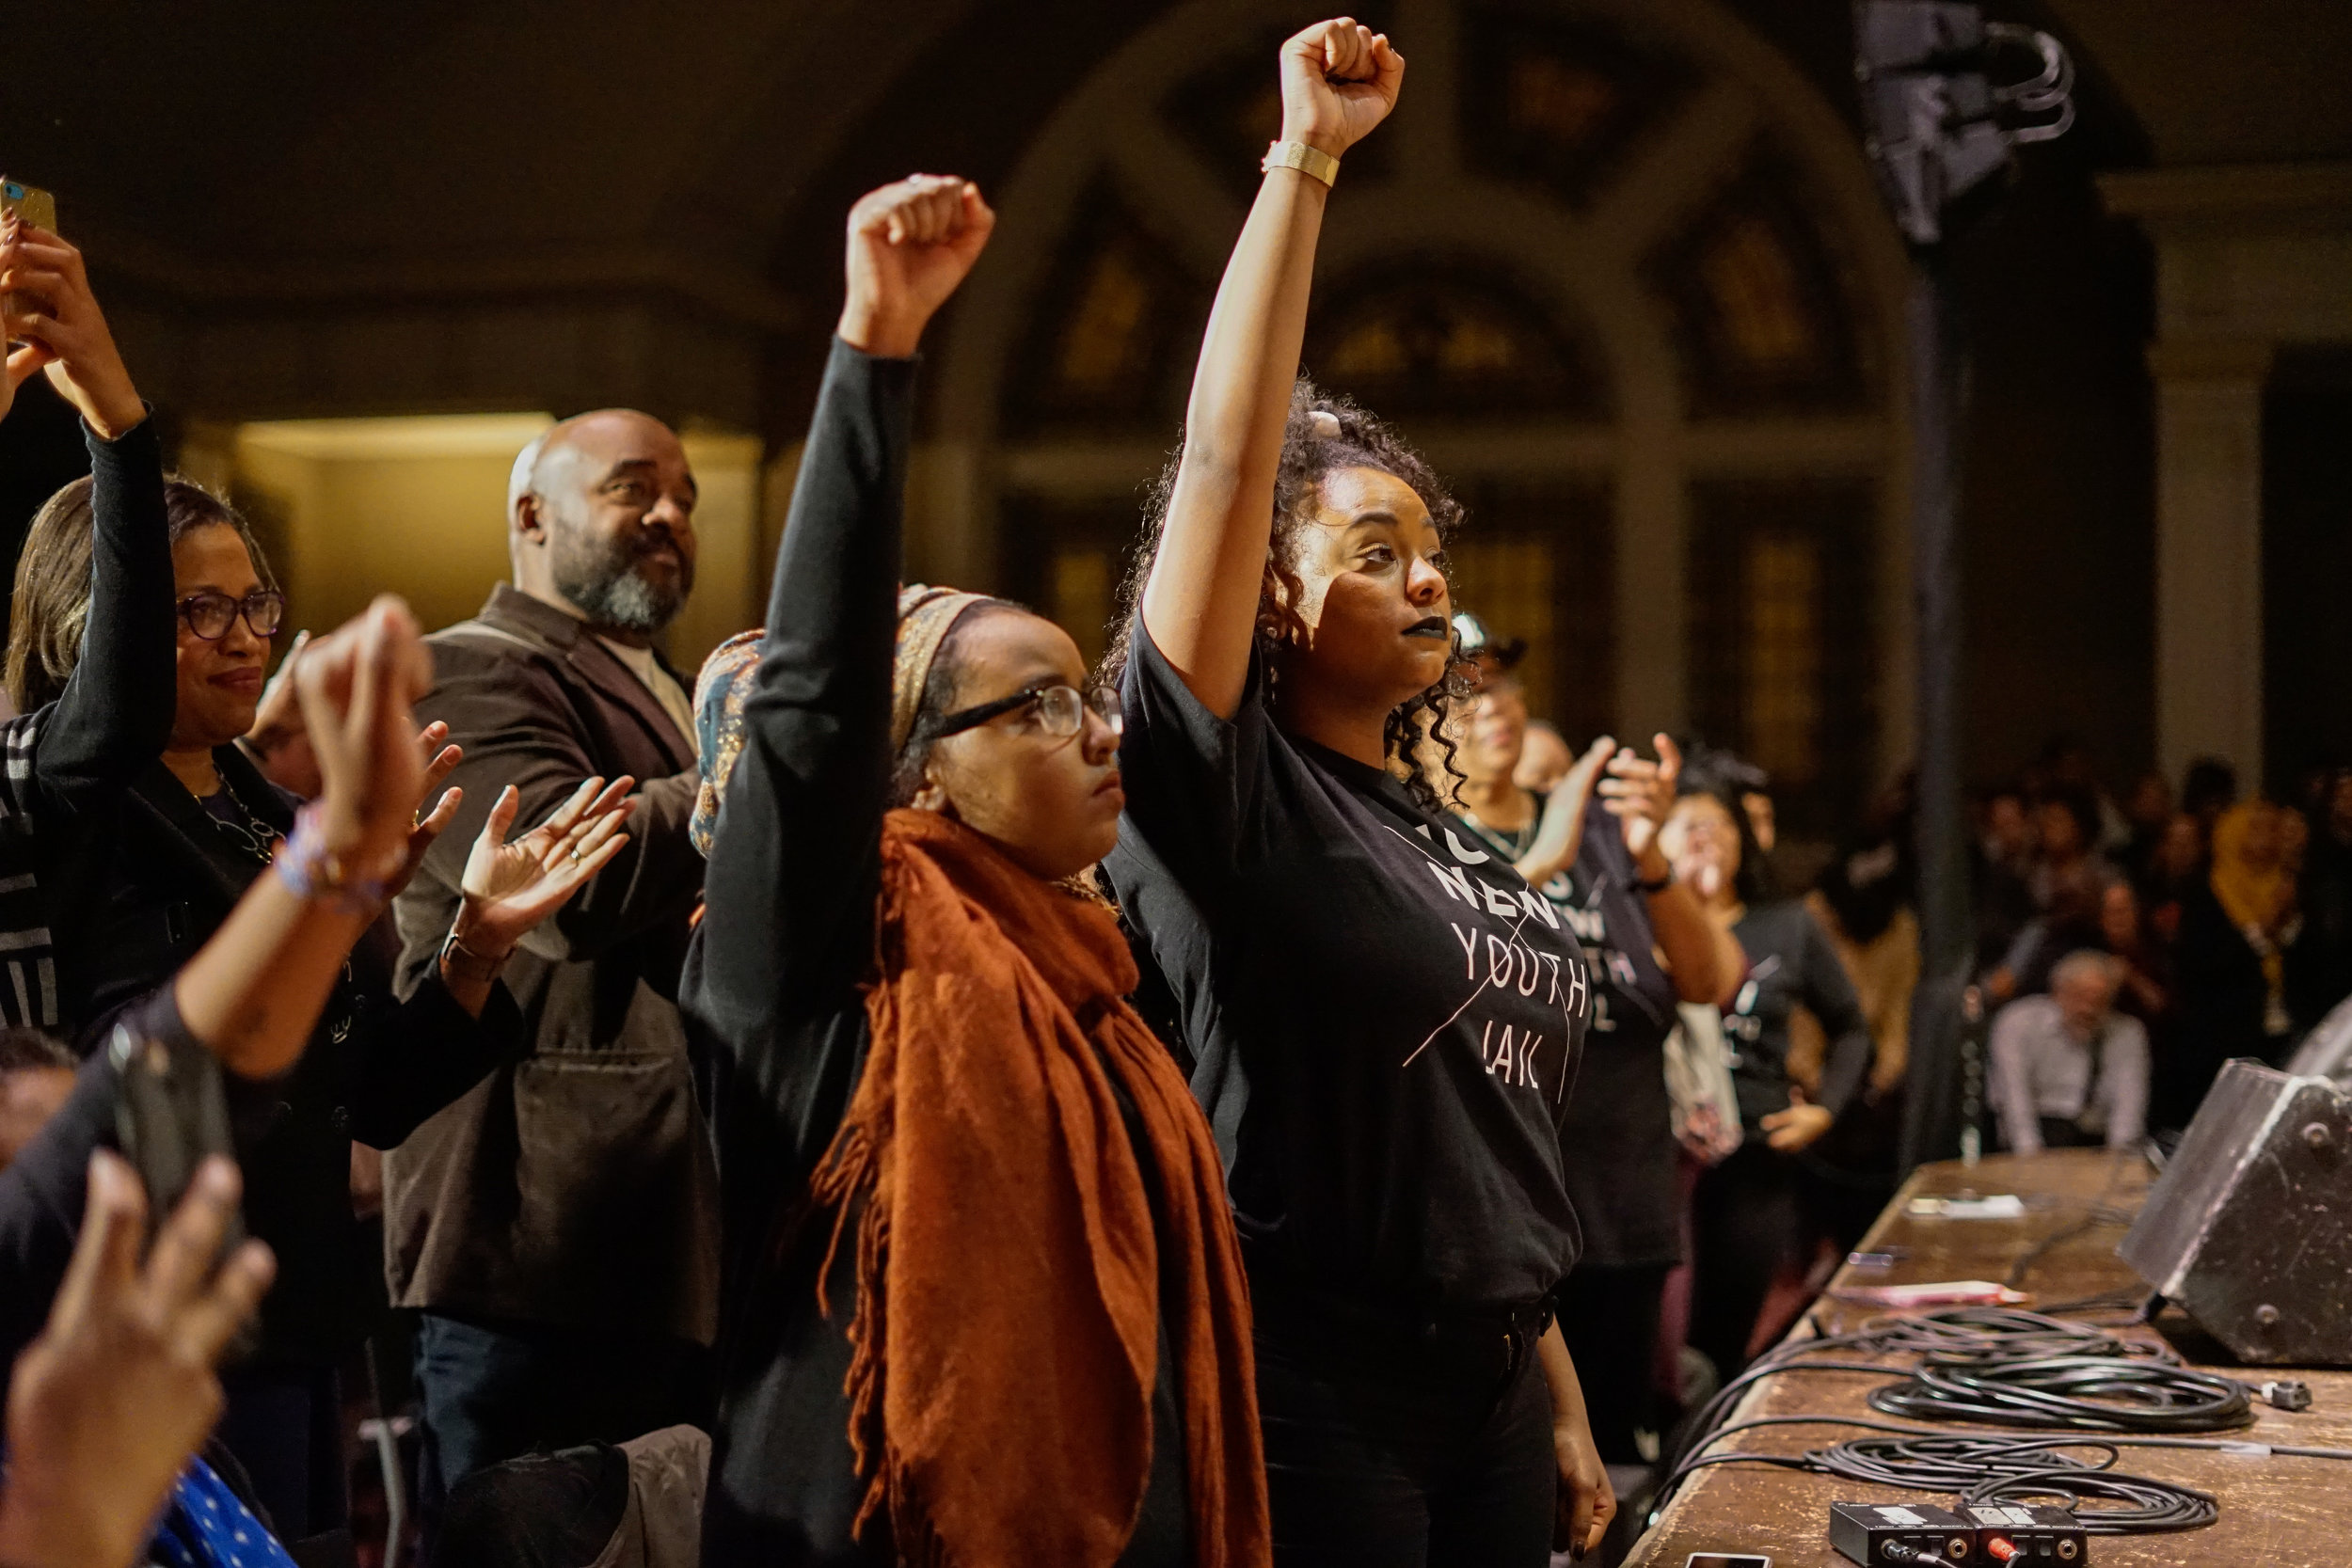  No Youth Jail activists raise their fist in support of Angela Davis’ opposition to mass incarceration at Seattle’s Town Hall. Jan 17, 2017. 